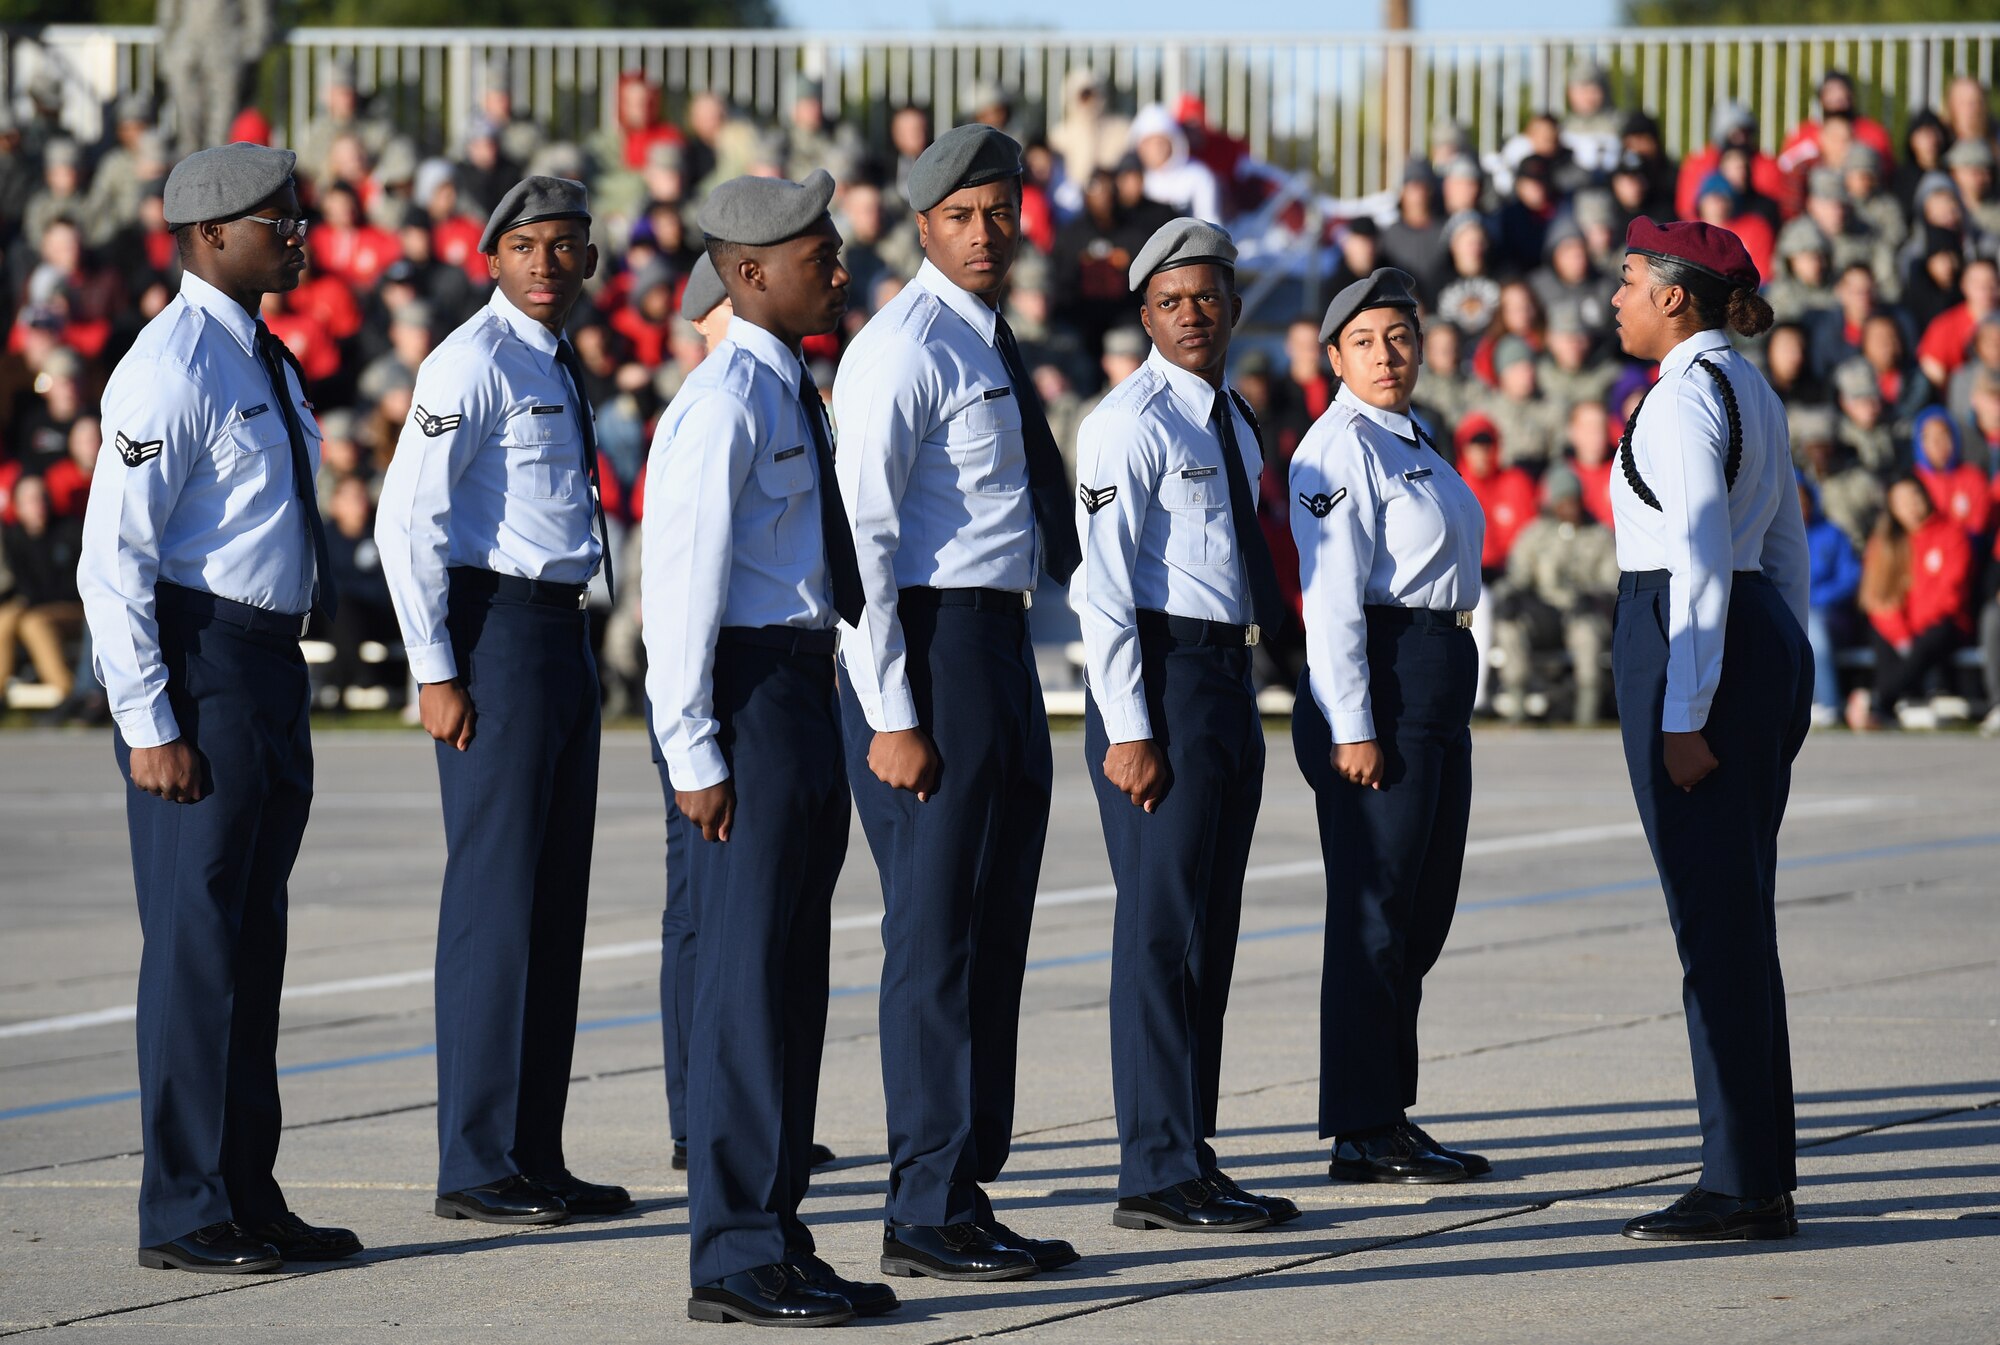 Members of the 335th Training Squadron regulation drill team perform during the 81st Training Group drill down on the Levitow Training Support Facility drill pad at Keesler Air Force Base, Mississippi, Nov. 1, 2019. Airmen from the 81st TRG competed in a quarterly open ranks inspection, regulation drill routine and freestyle drill routine. Keesler trains more than 30,000 students each year. While in training, Airmen are given the opportunity to volunteer to learn and execute drill down routines. (U.S. Air Force photo by Kemberly Groue)